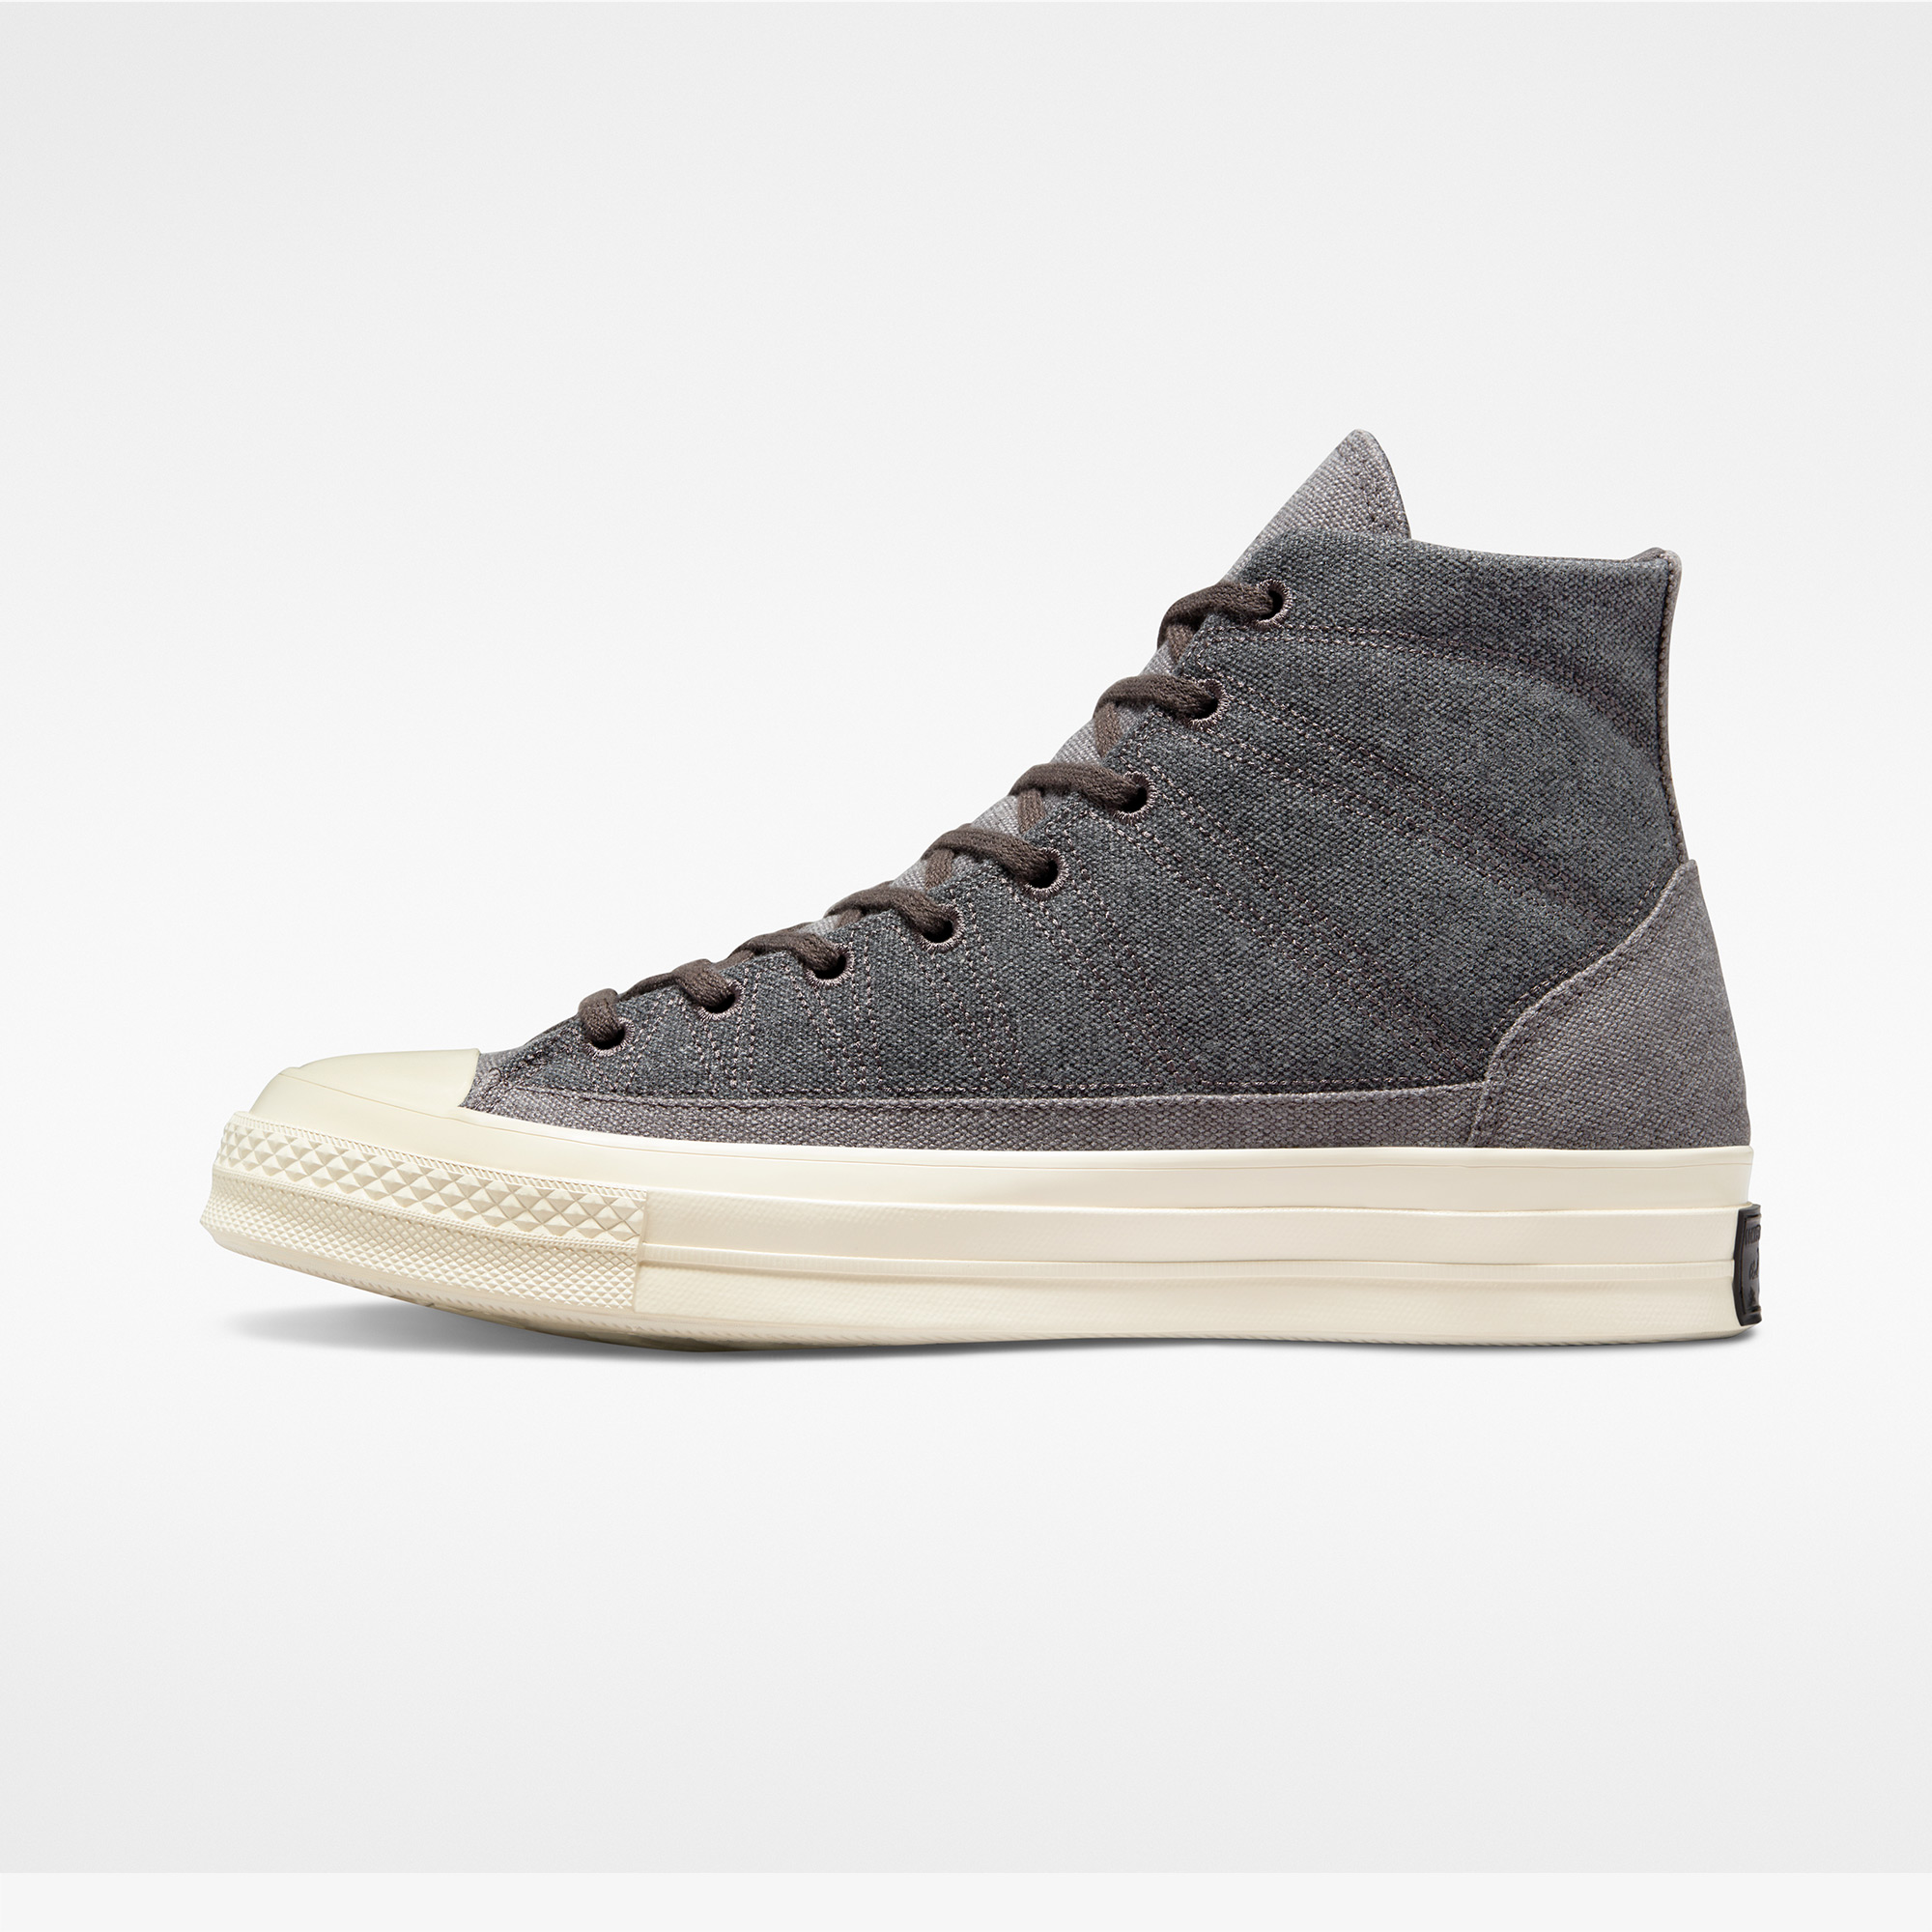 Converse Chuck 70 Hiking Stitched Canvas Unisex Siyah Sneaker